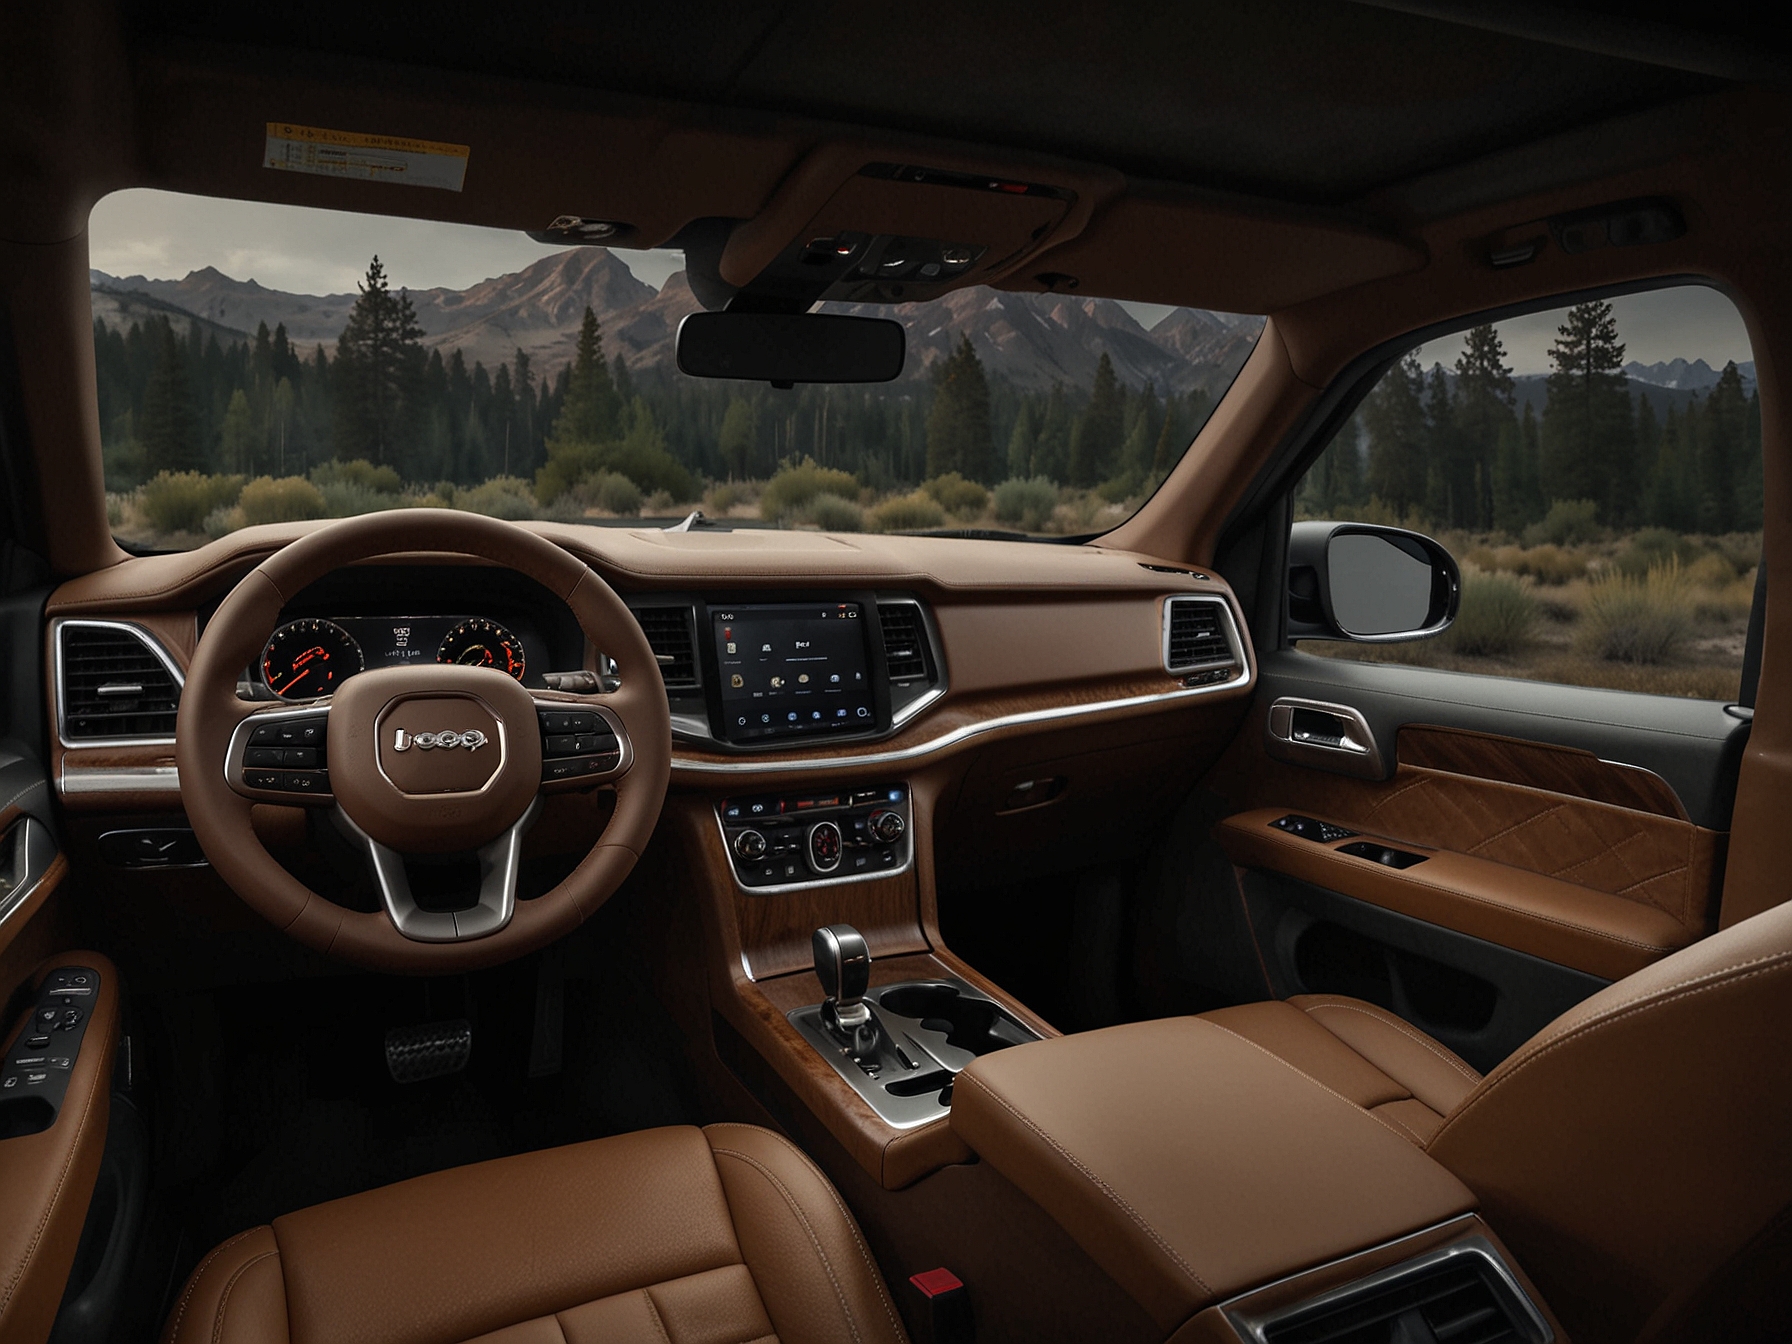 The interior of the 2024 Jeep Wagoneer S is shown, highlighting luxurious materials and advanced infotainment systems. The cabin reflects Jeep's blend of comfort, technology, and high-end craftsmanship.